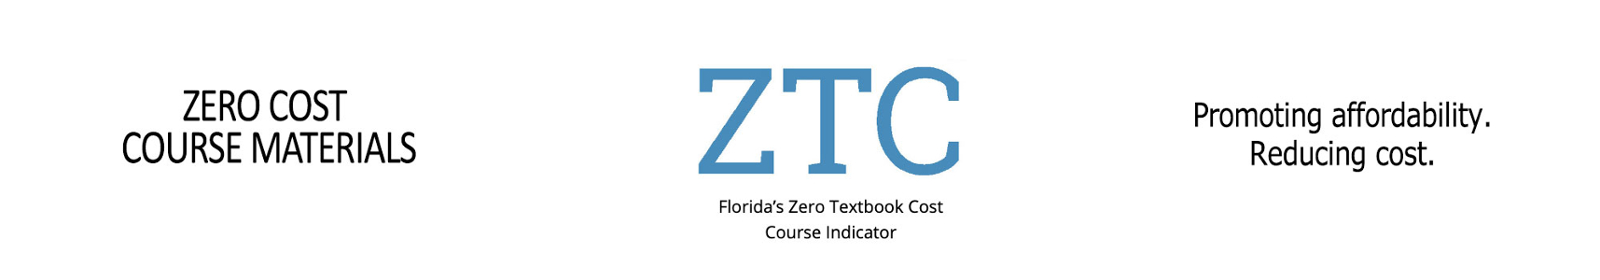 zero cost course materials. promoting affordability. reducing costs with ZTC logo